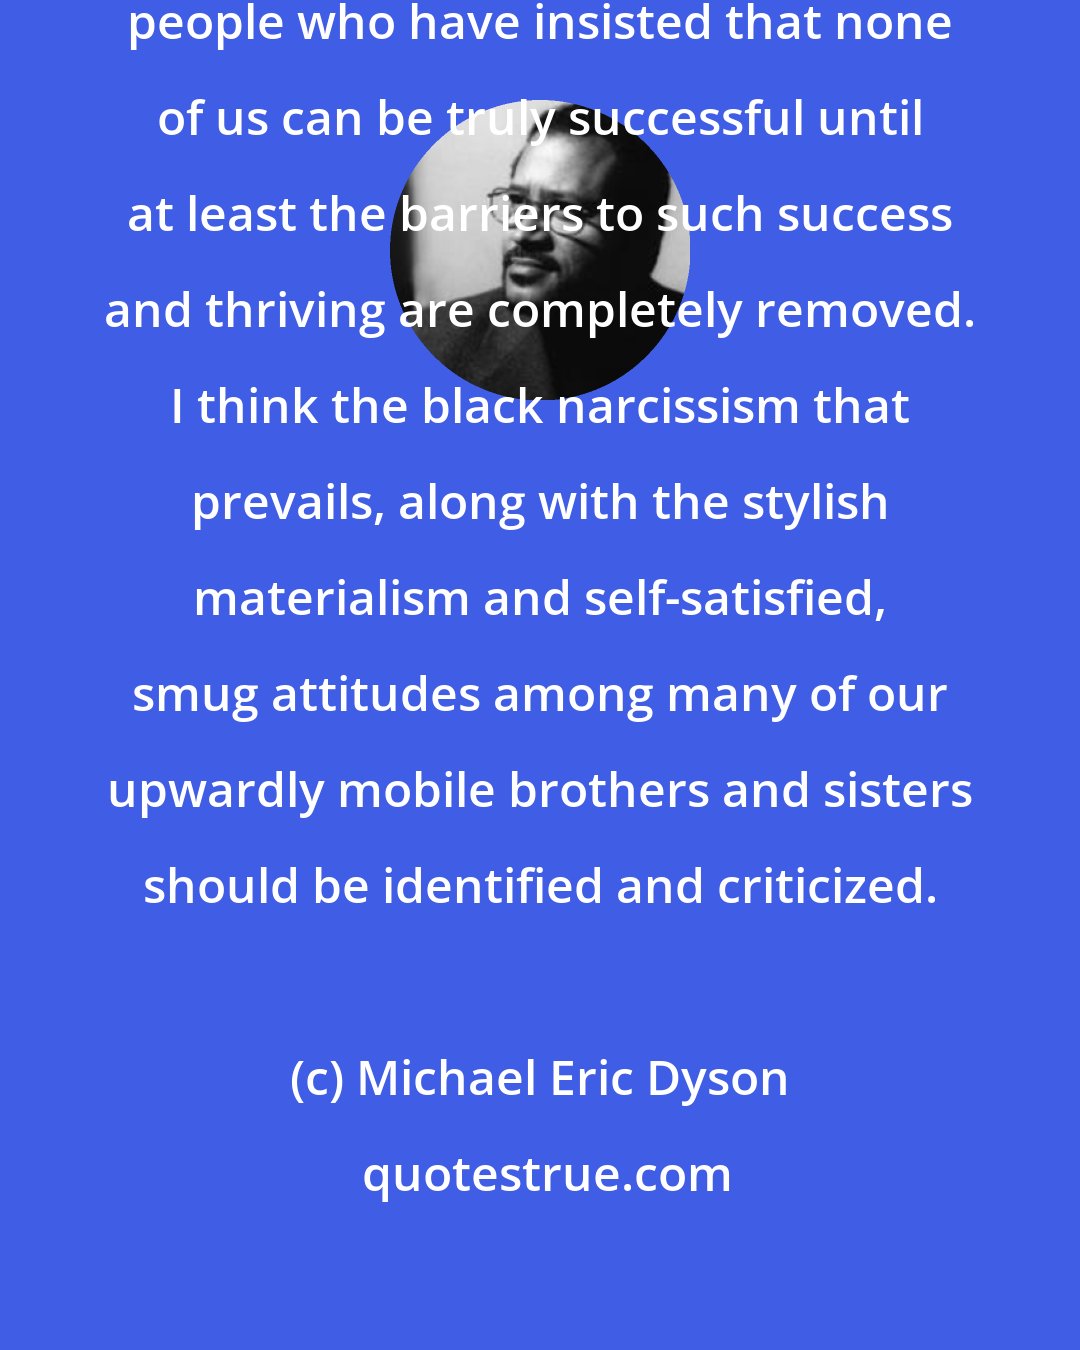 Michael Eric Dyson: We come from a proud tradition of people who have insisted that none of us can be truly successful until at least the barriers to such success and thriving are completely removed. I think the black narcissism that prevails, along with the stylish materialism and self-satisfied, smug attitudes among many of our upwardly mobile brothers and sisters should be identified and criticized.